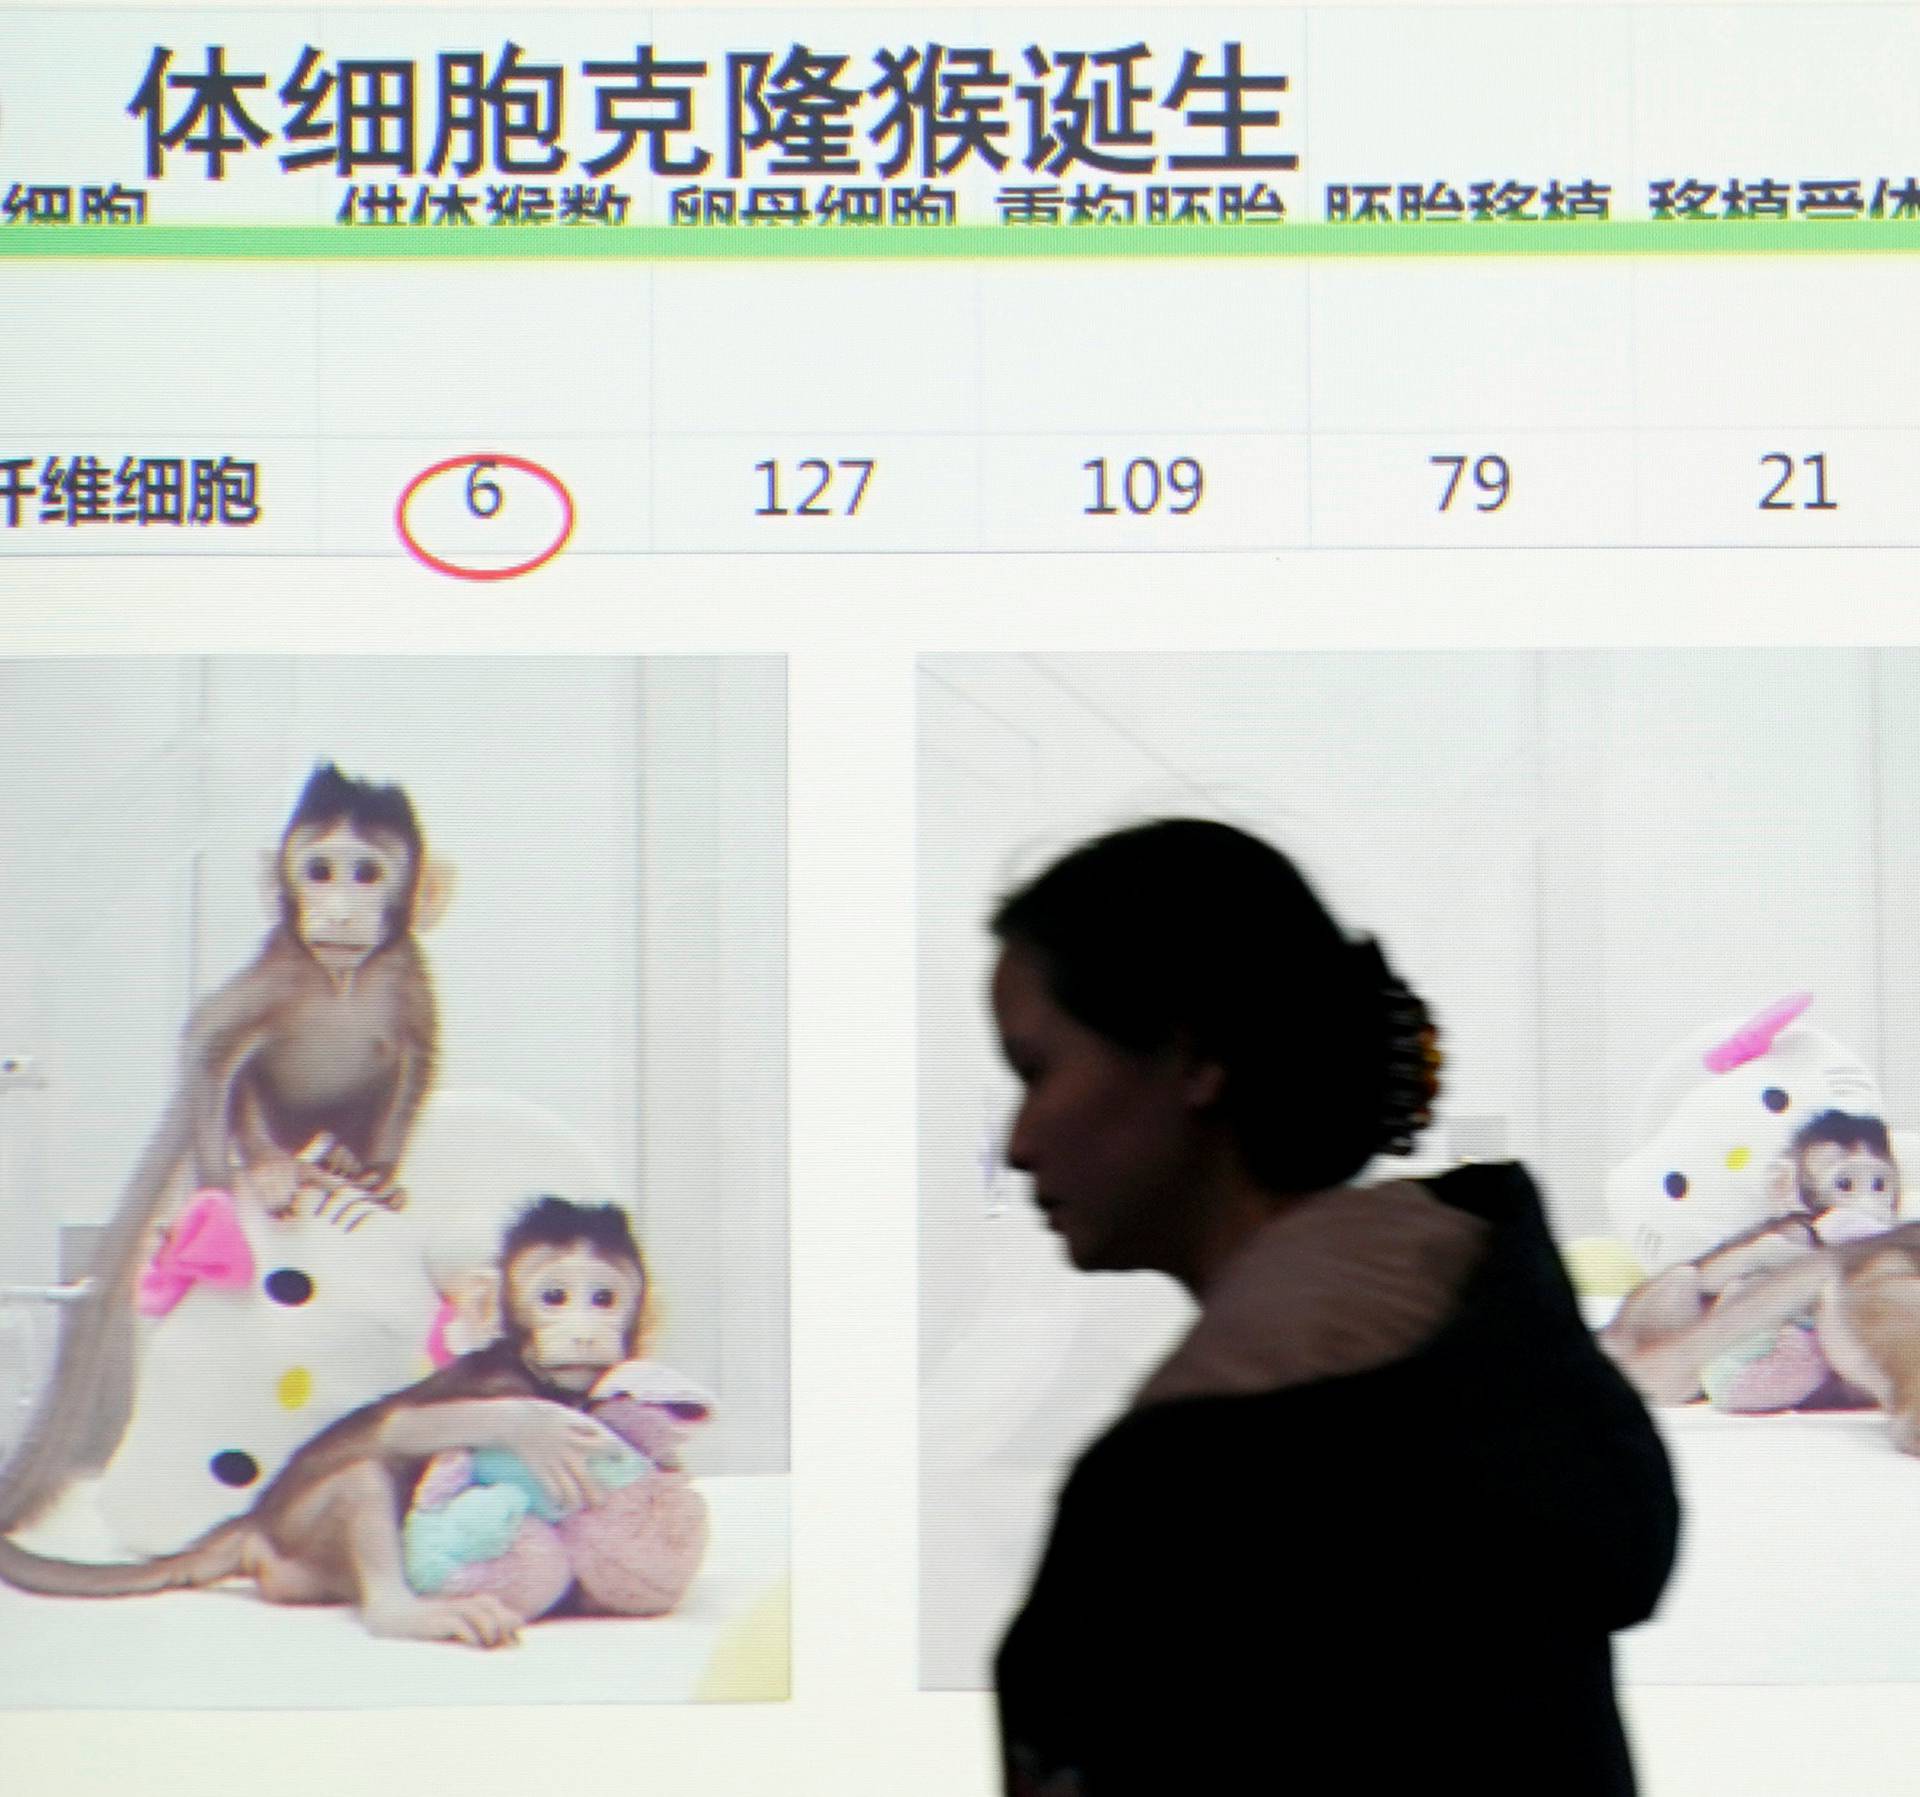 Pictures of Cloned monkeys Zhong Zhong and Hua Hua are seen at a news conference at the Institute of Neuroscience of Chinese Academy of Sciences in Shanghai